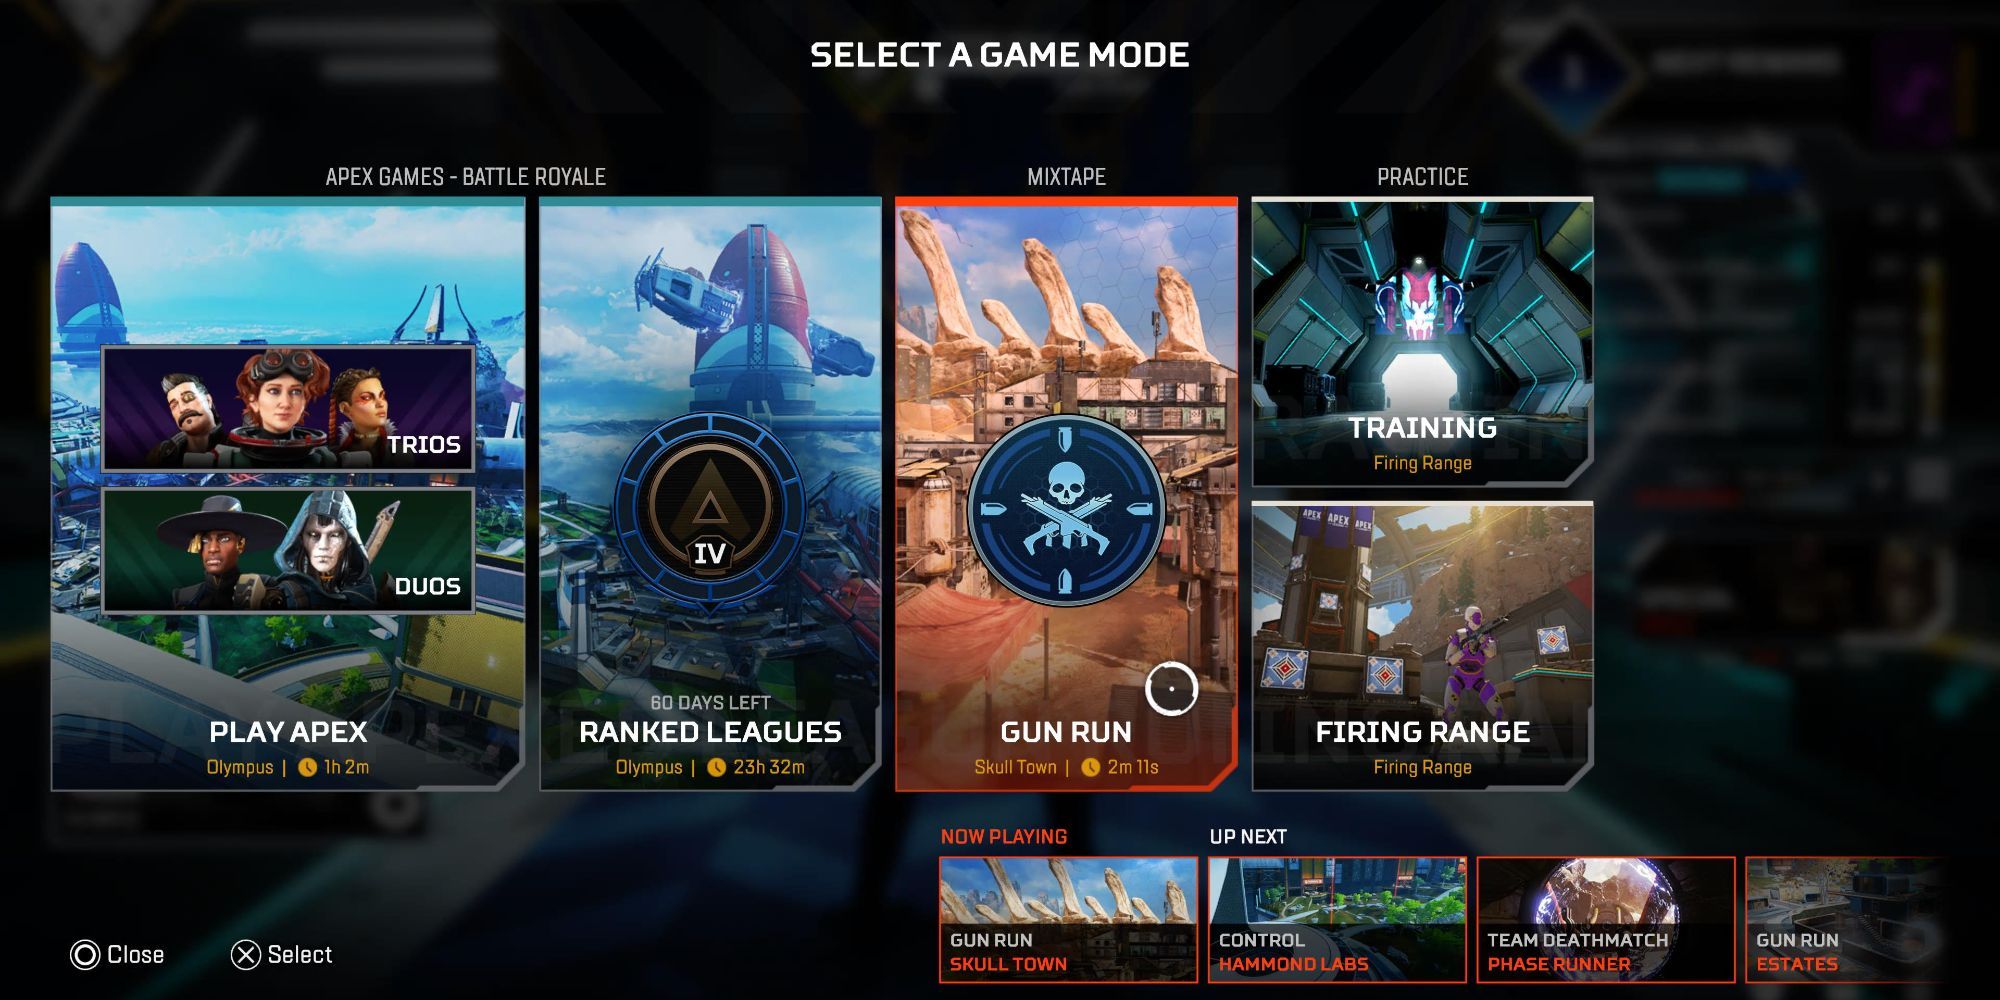 The game mode menu showing Mixtape mode with Gun Run highlighted in Apex Legends